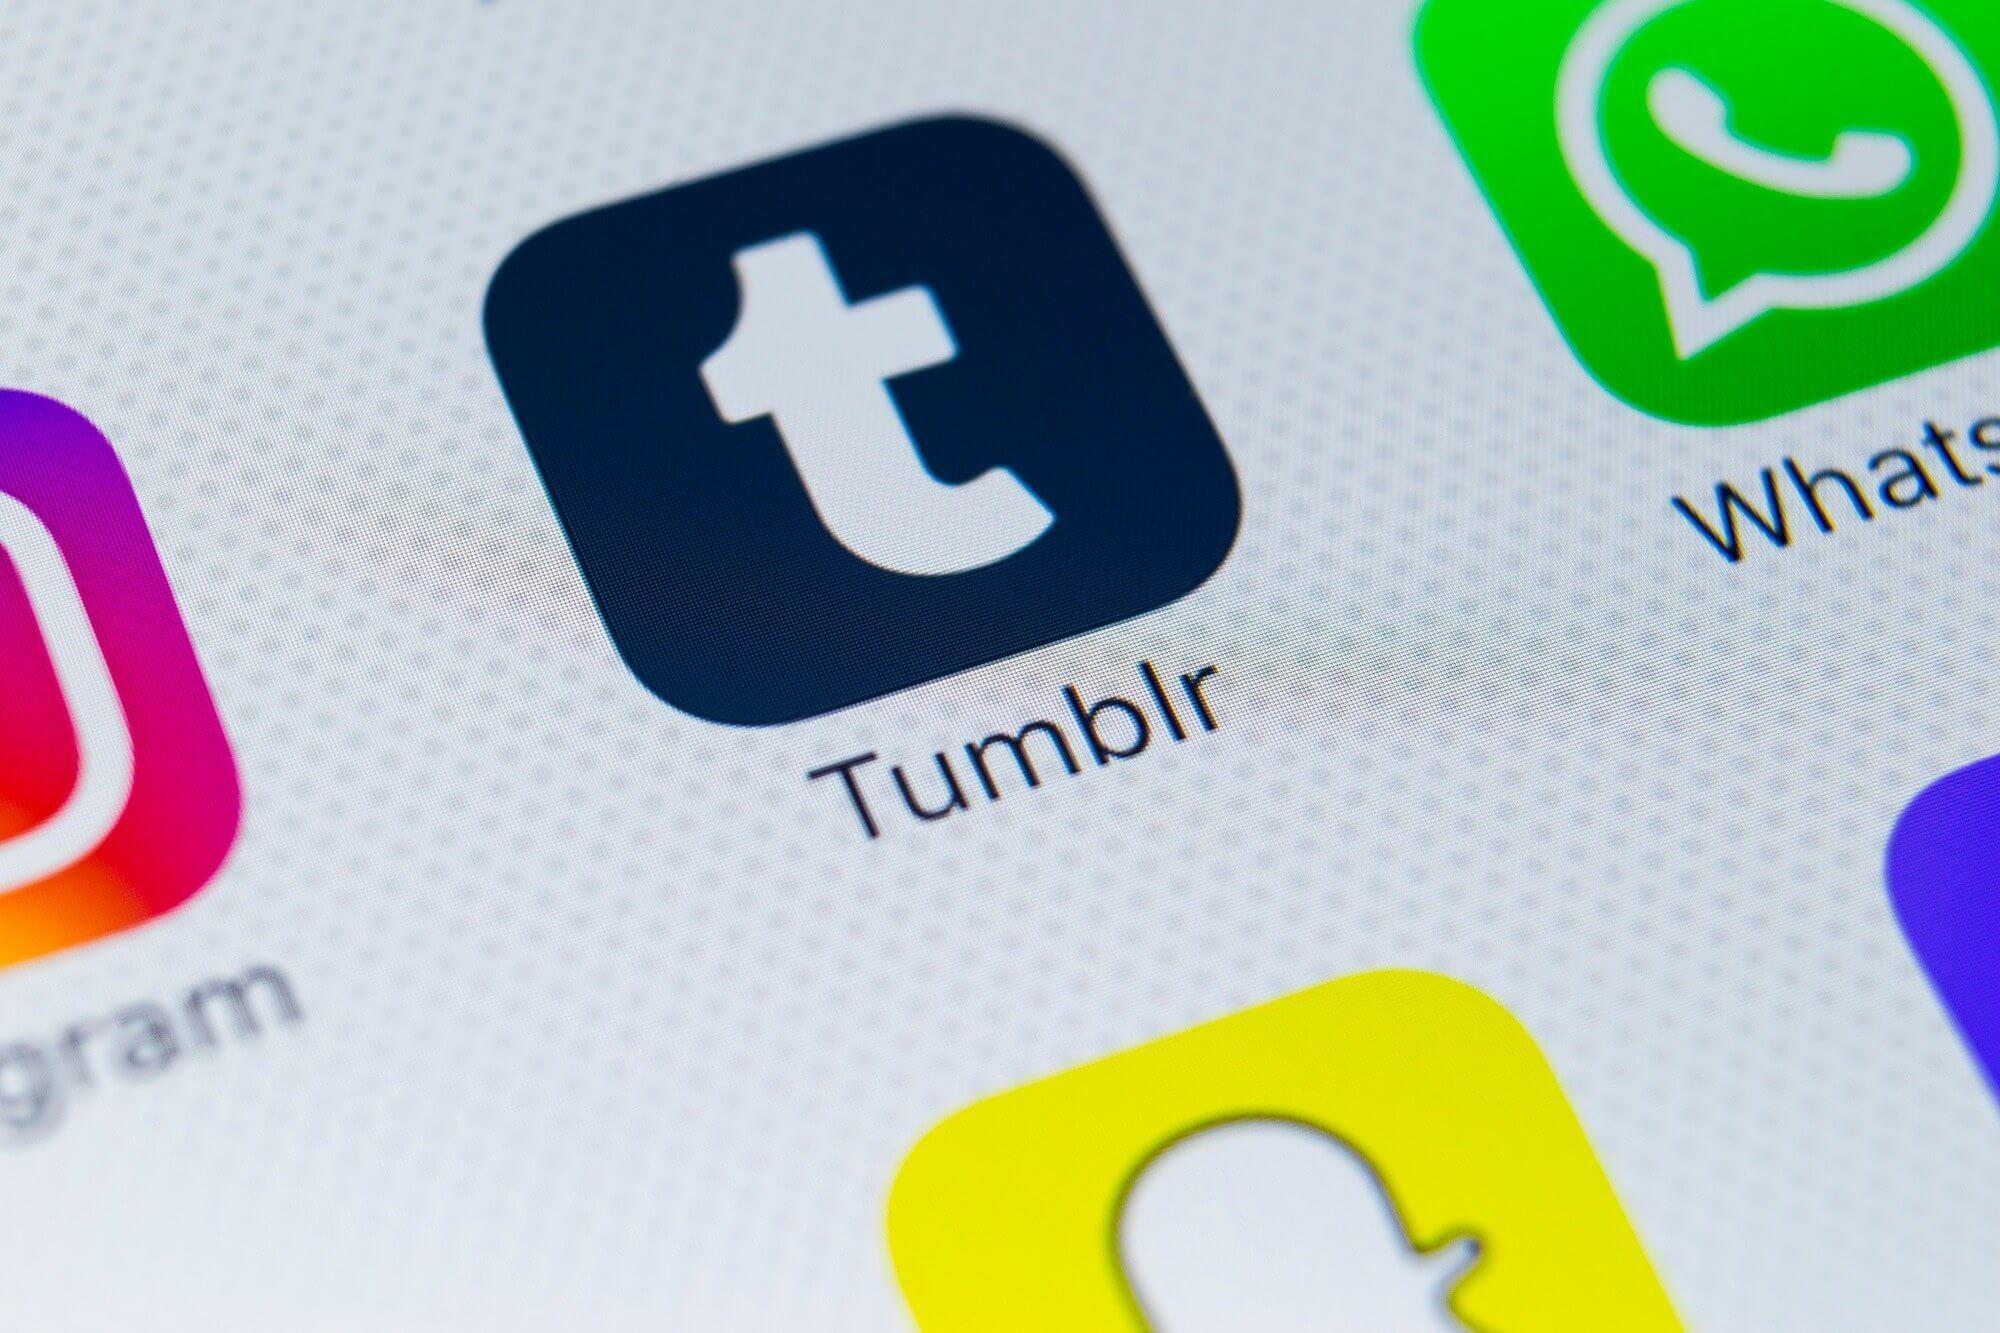 Official Tumblr Logo - Tumblr disappears from App Store after discovery of child